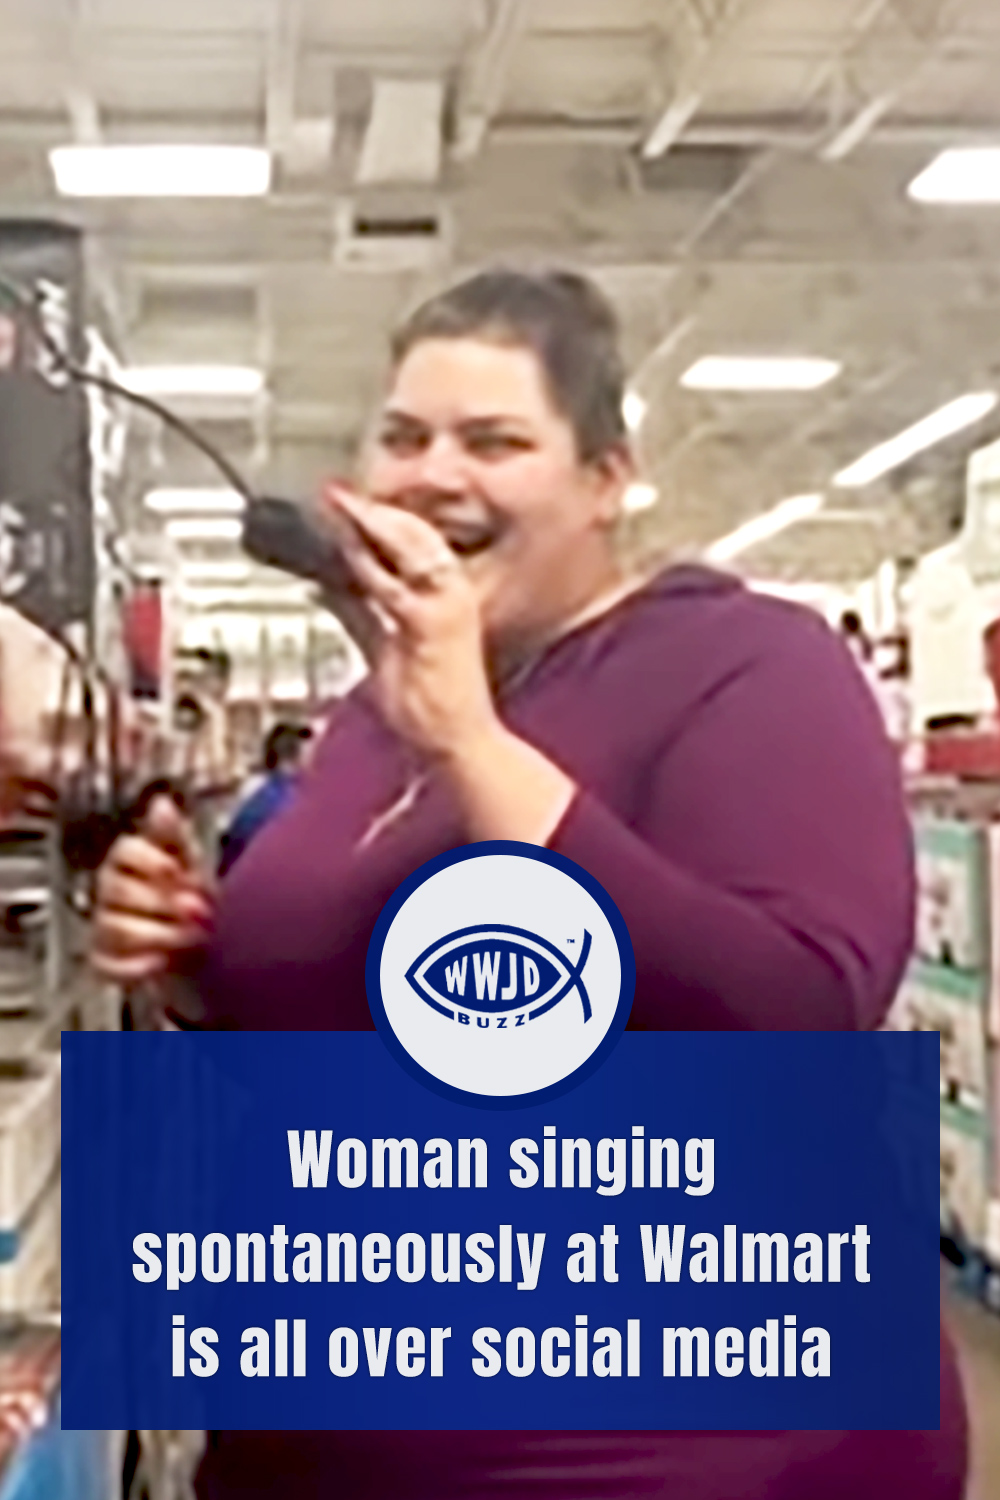 Woman singing spontaneously at Walmart is all over social media